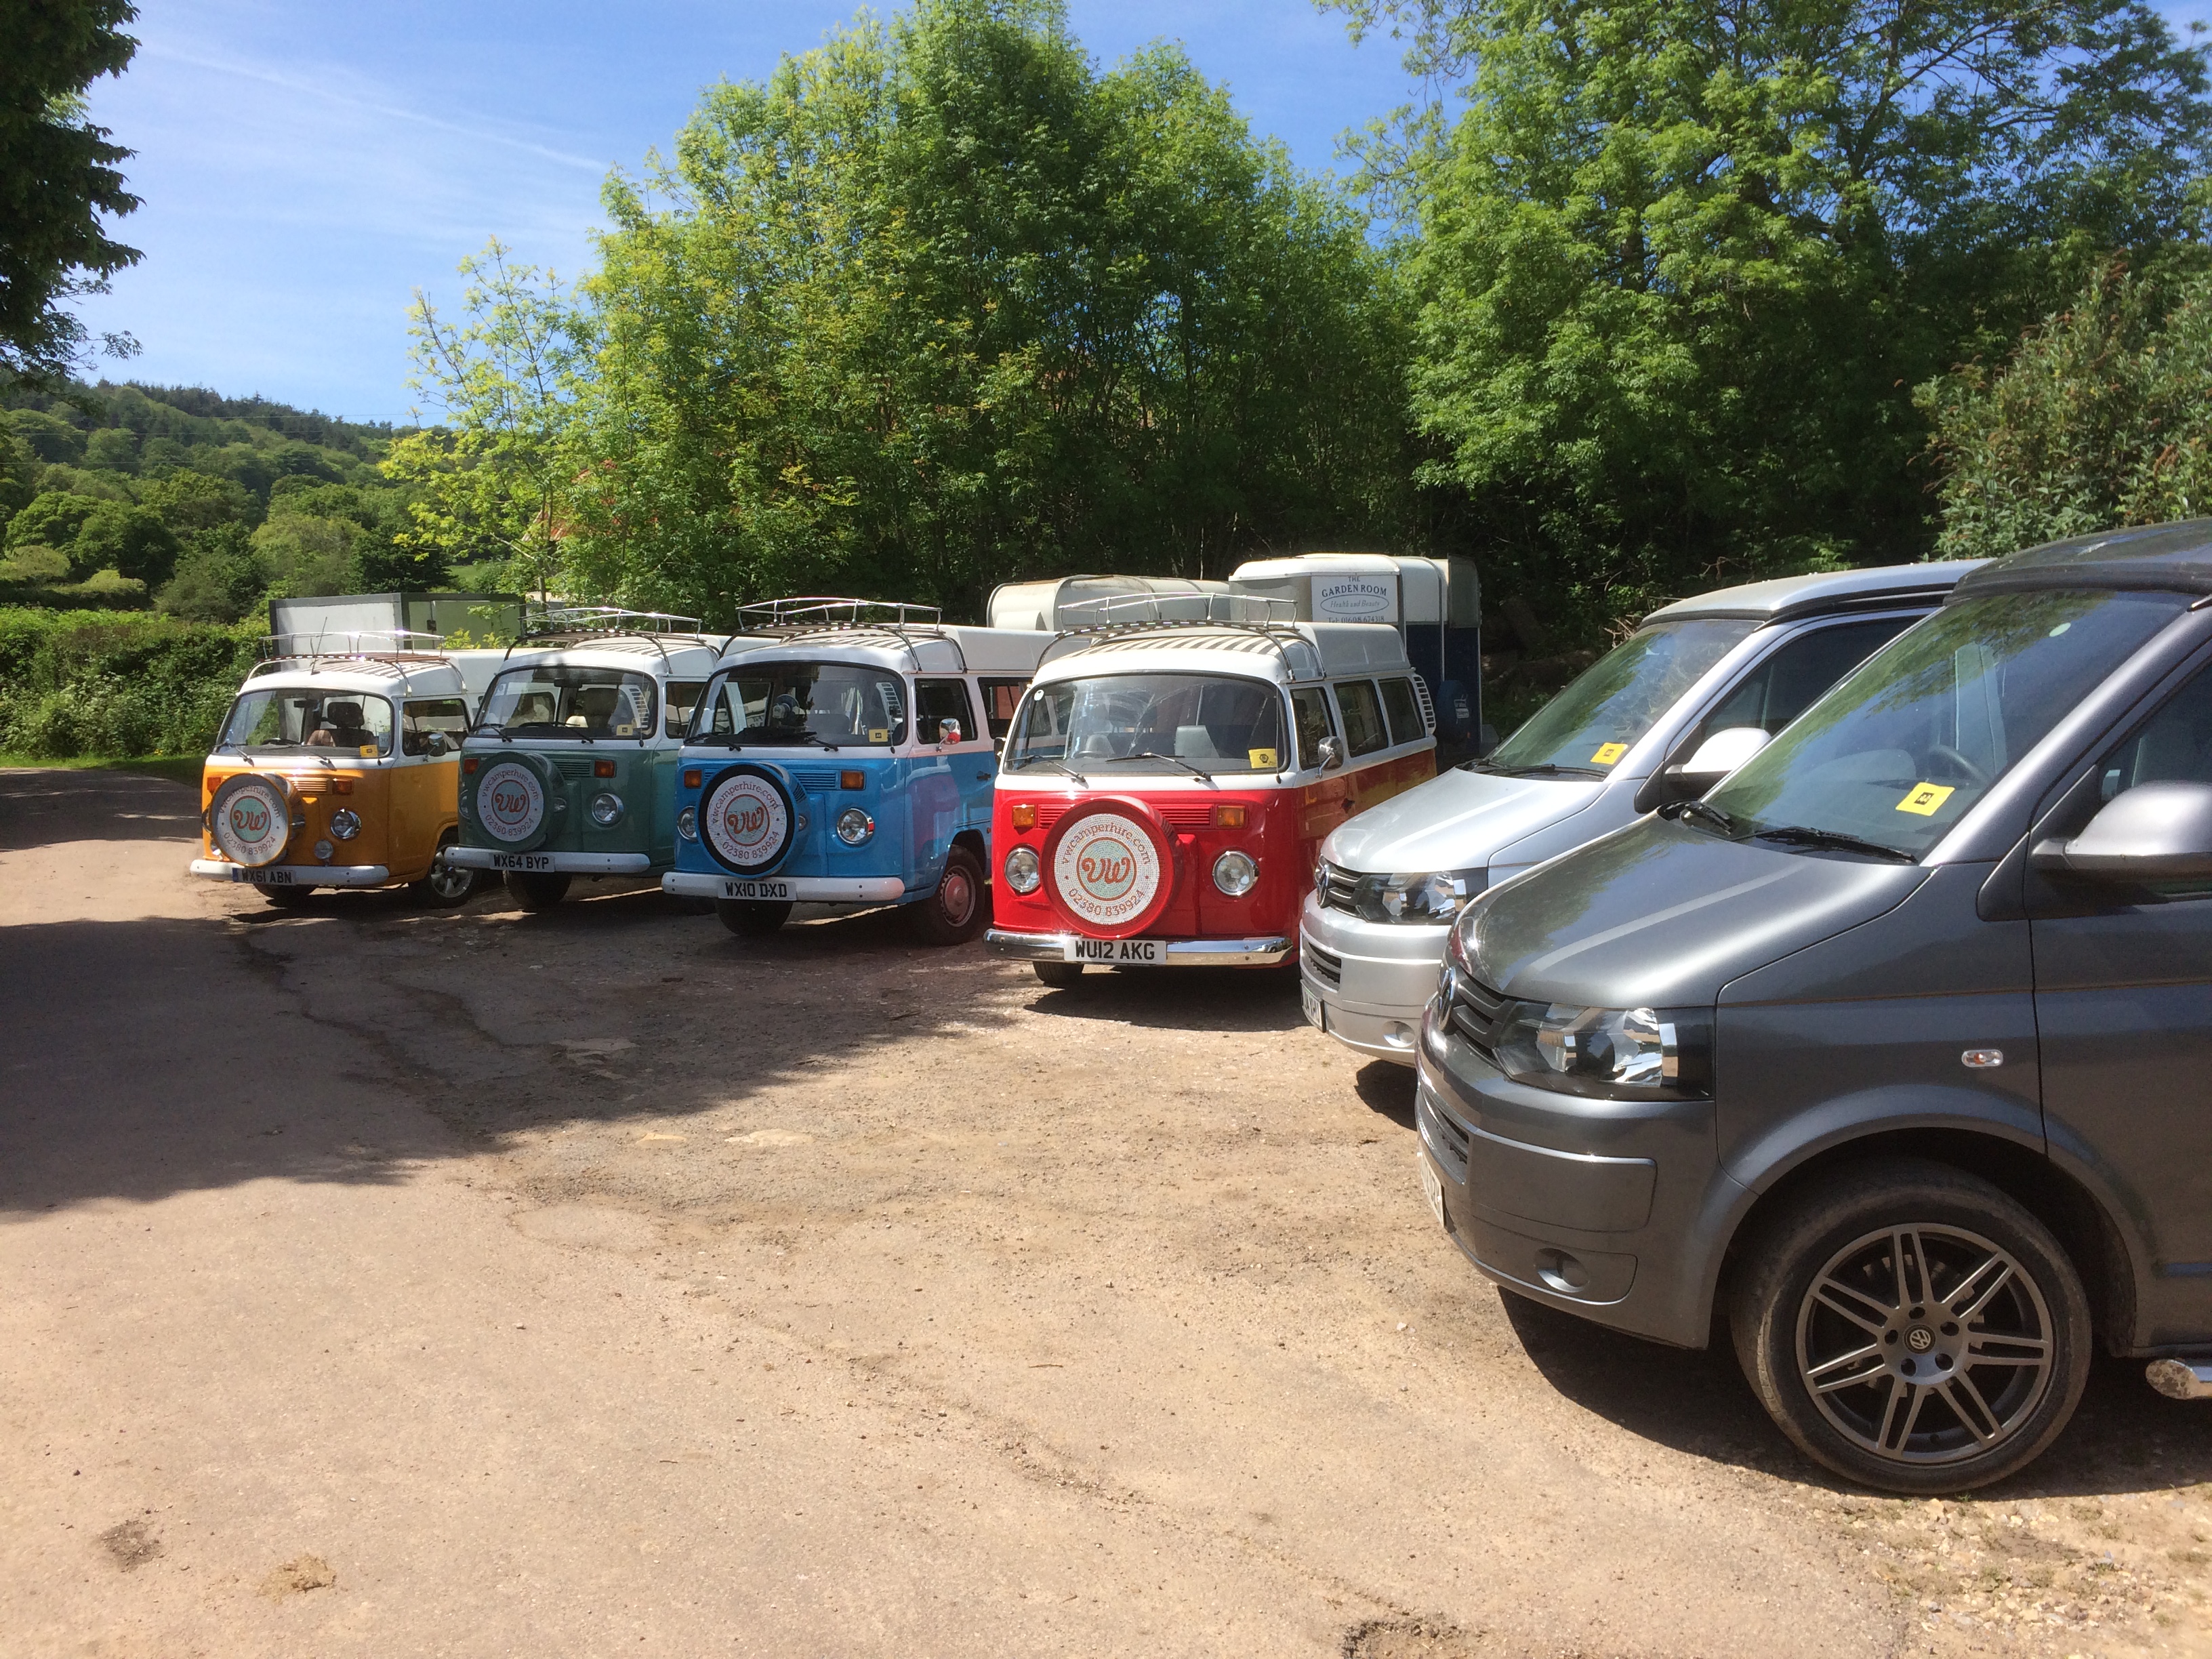 Top 10 Tips for a Successful VW Campervan Adventure